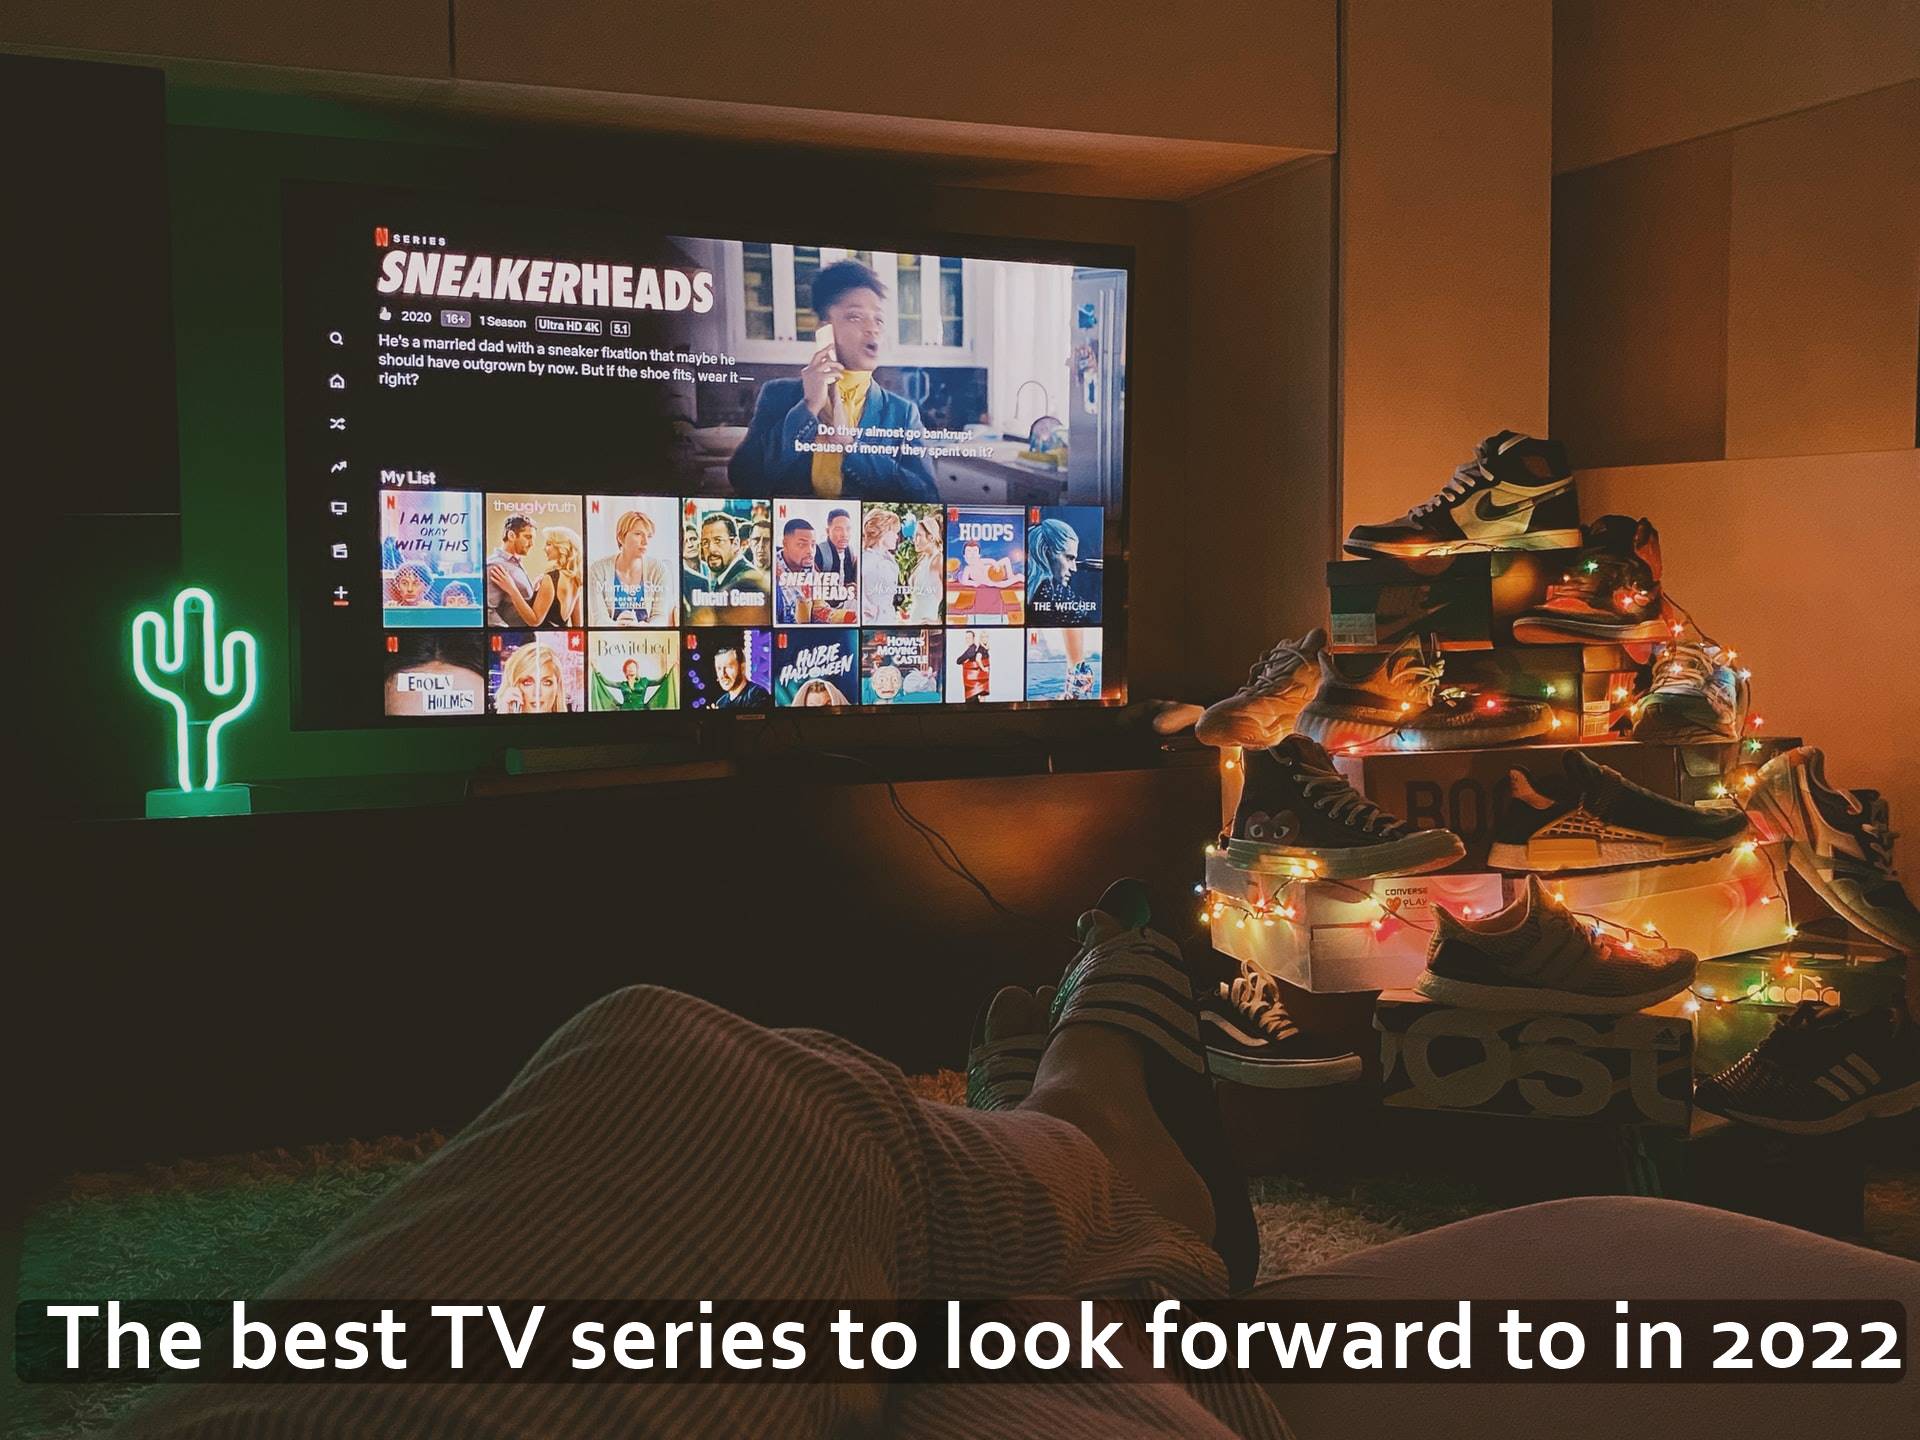 The best TV series to look forward to in 2022